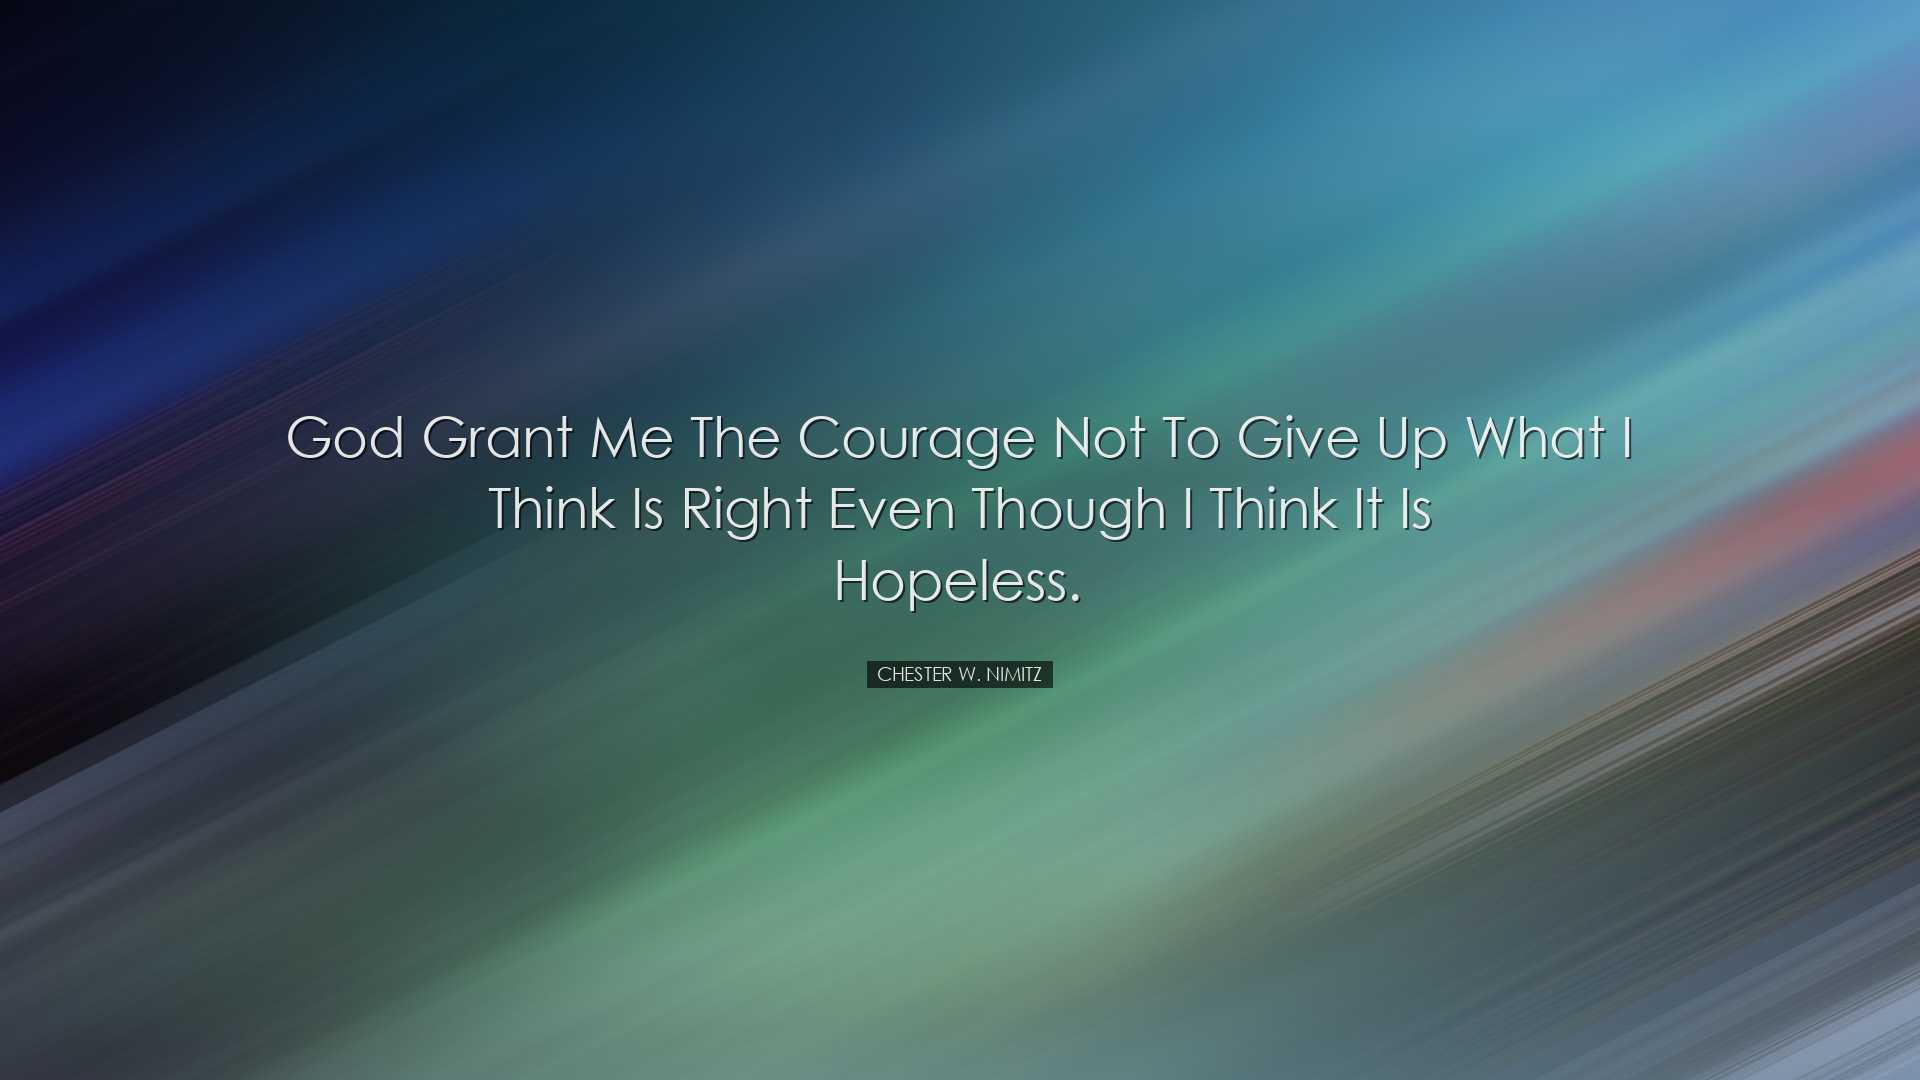 God grant me the courage not to give up what I think is right even